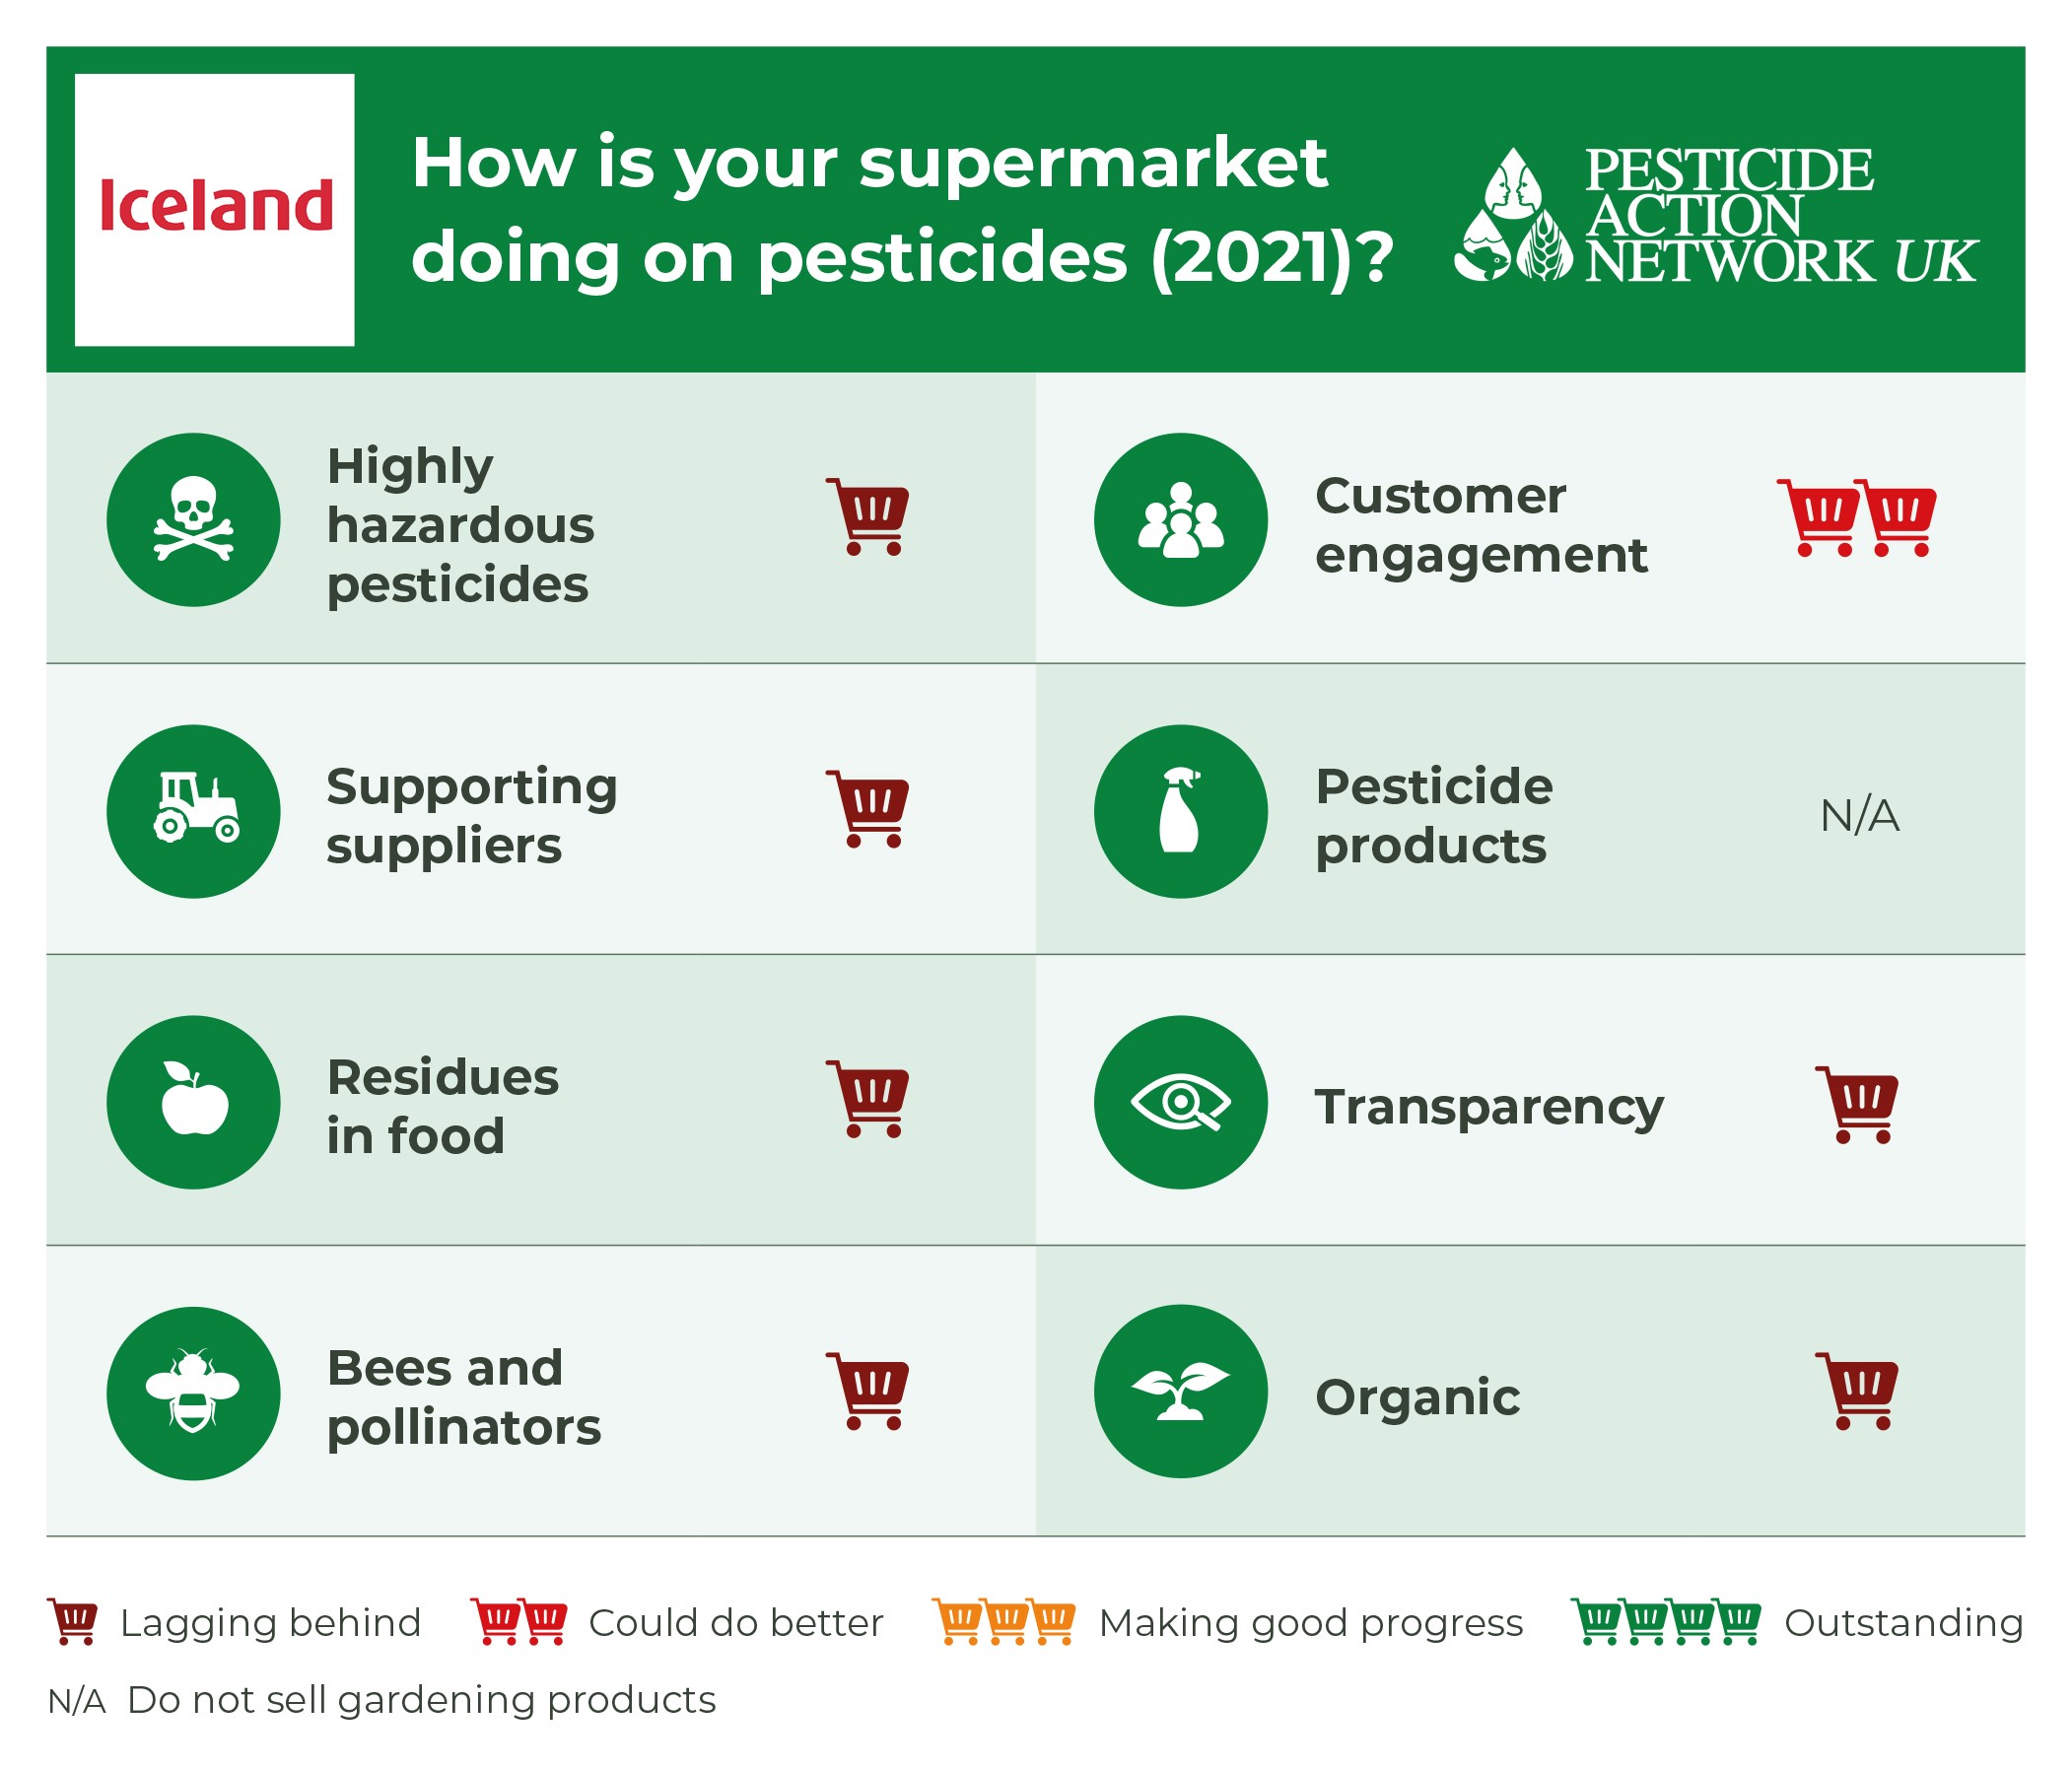 How is Iceland doing on pesticides?